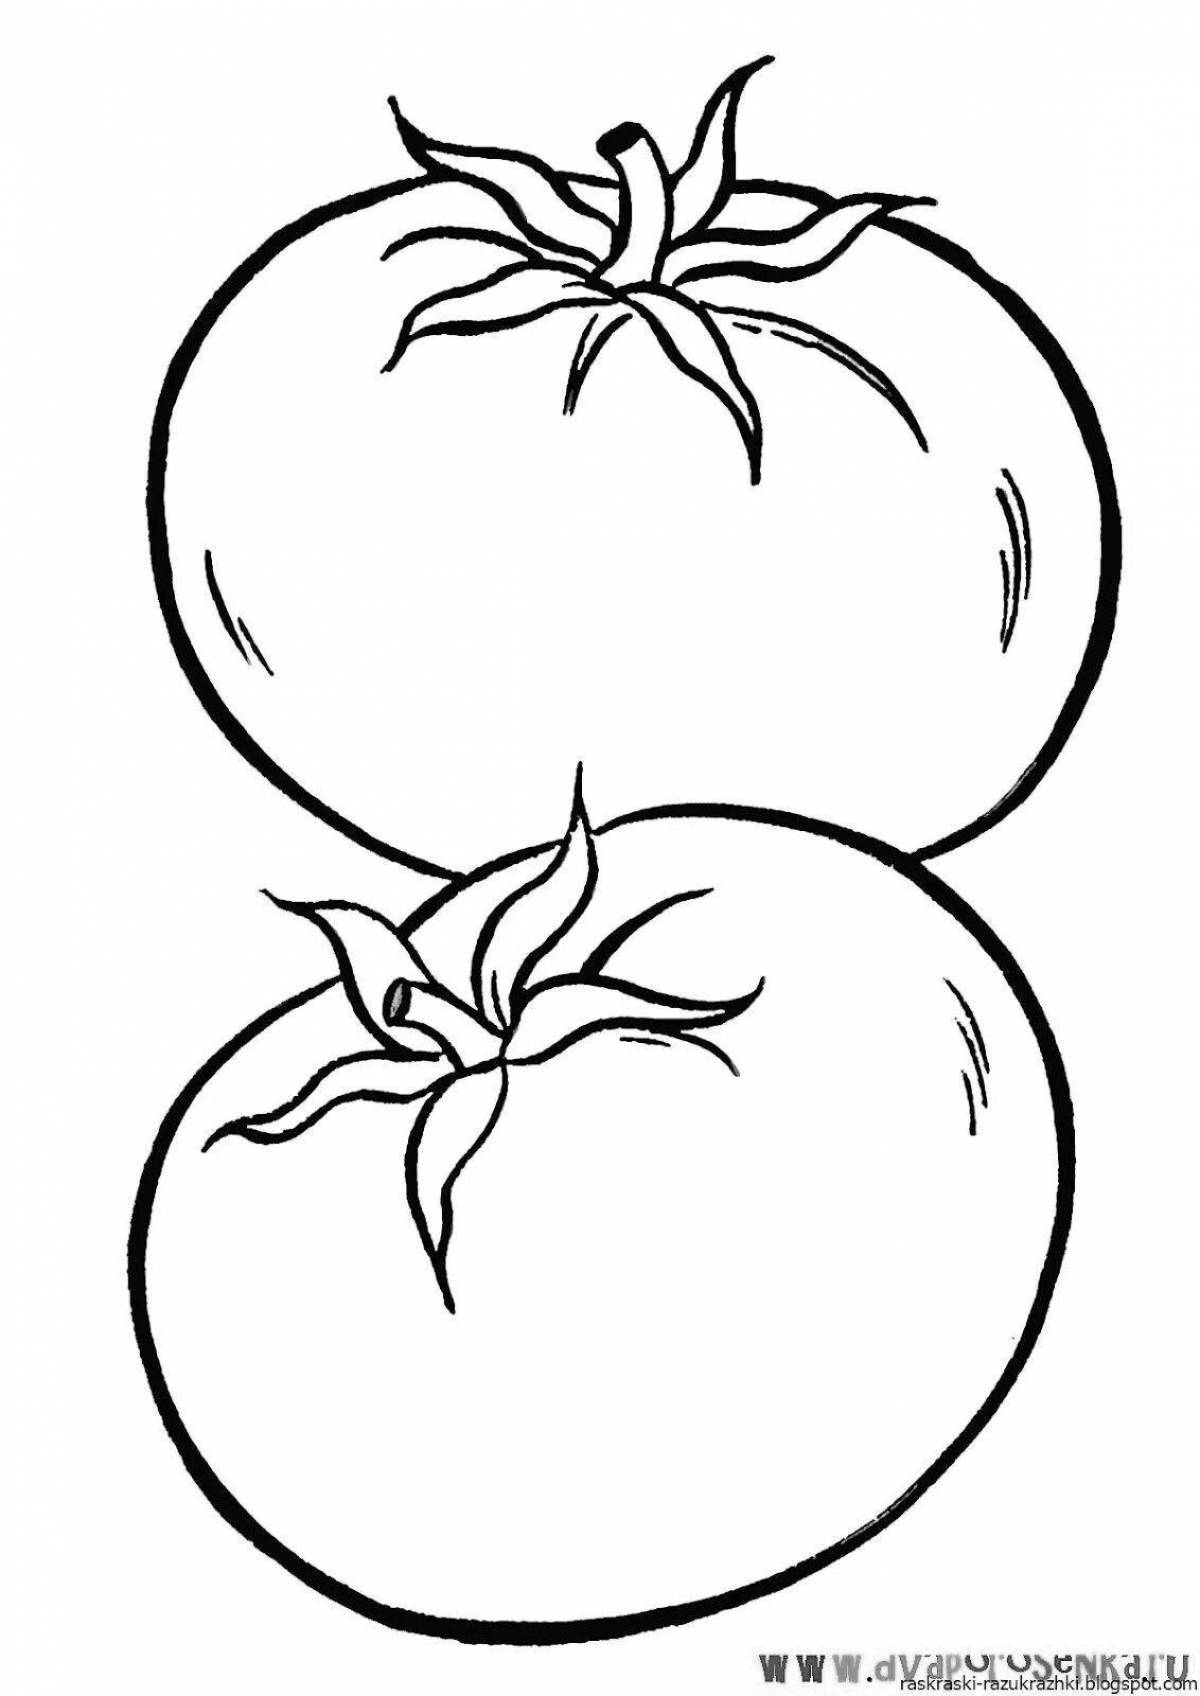 Crazy Tomato Coloring Pages for 2-3 year olds